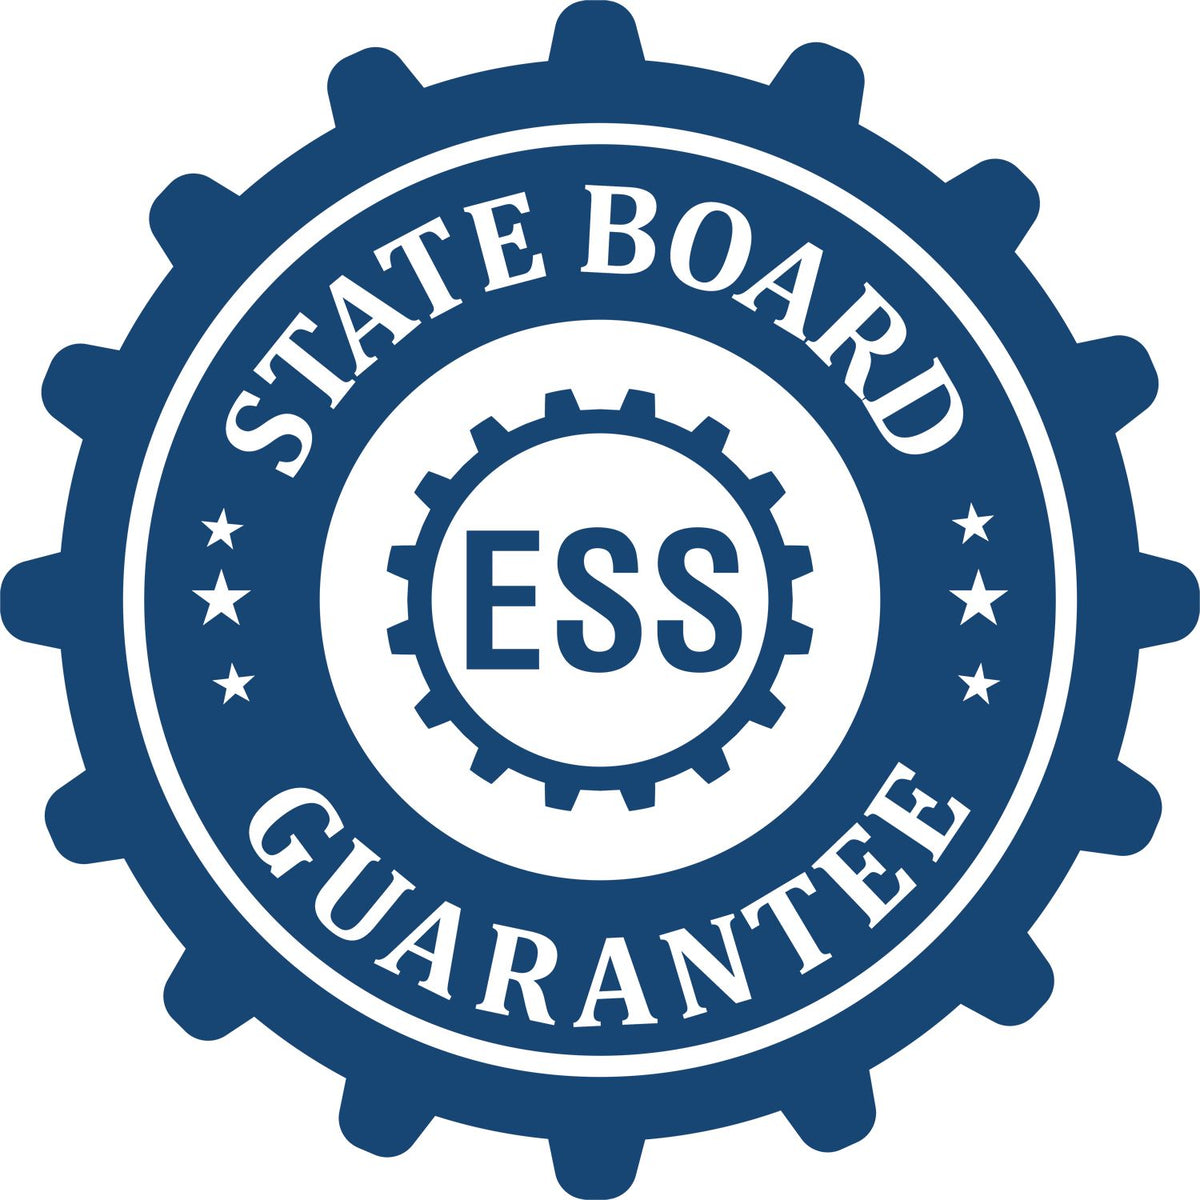 An emblem in a gear shape illustrating a state board guarantee for the Handheld Maine Land Surveyor Seal product.